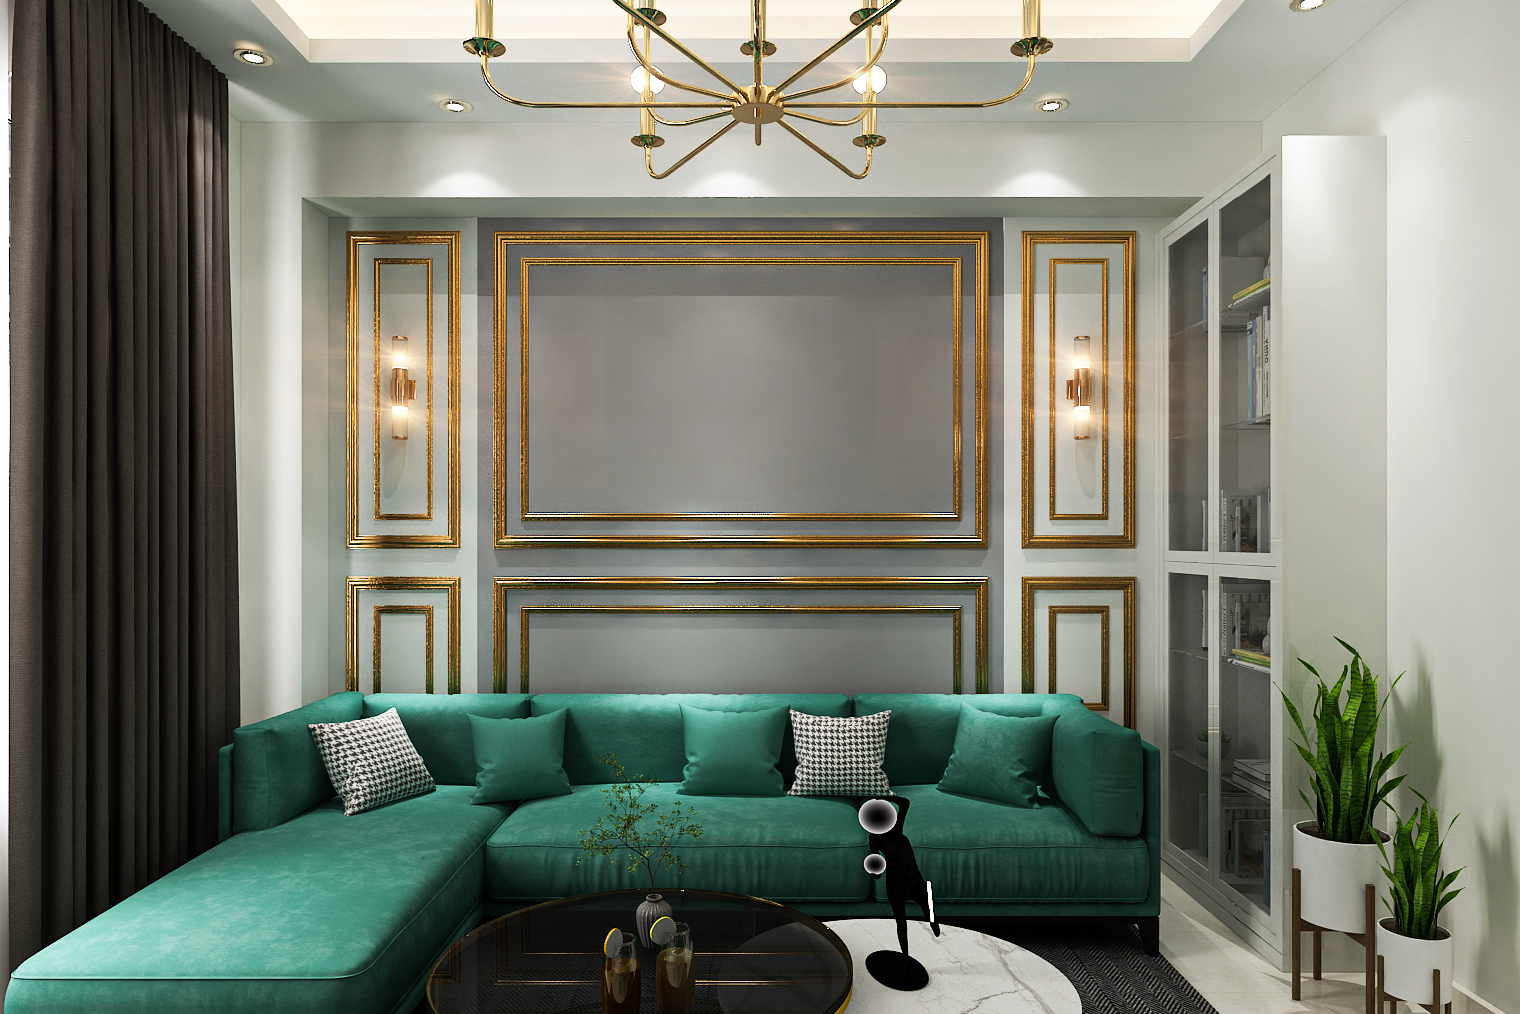 Classic Living Room Design With L-Shaped Green Sofa